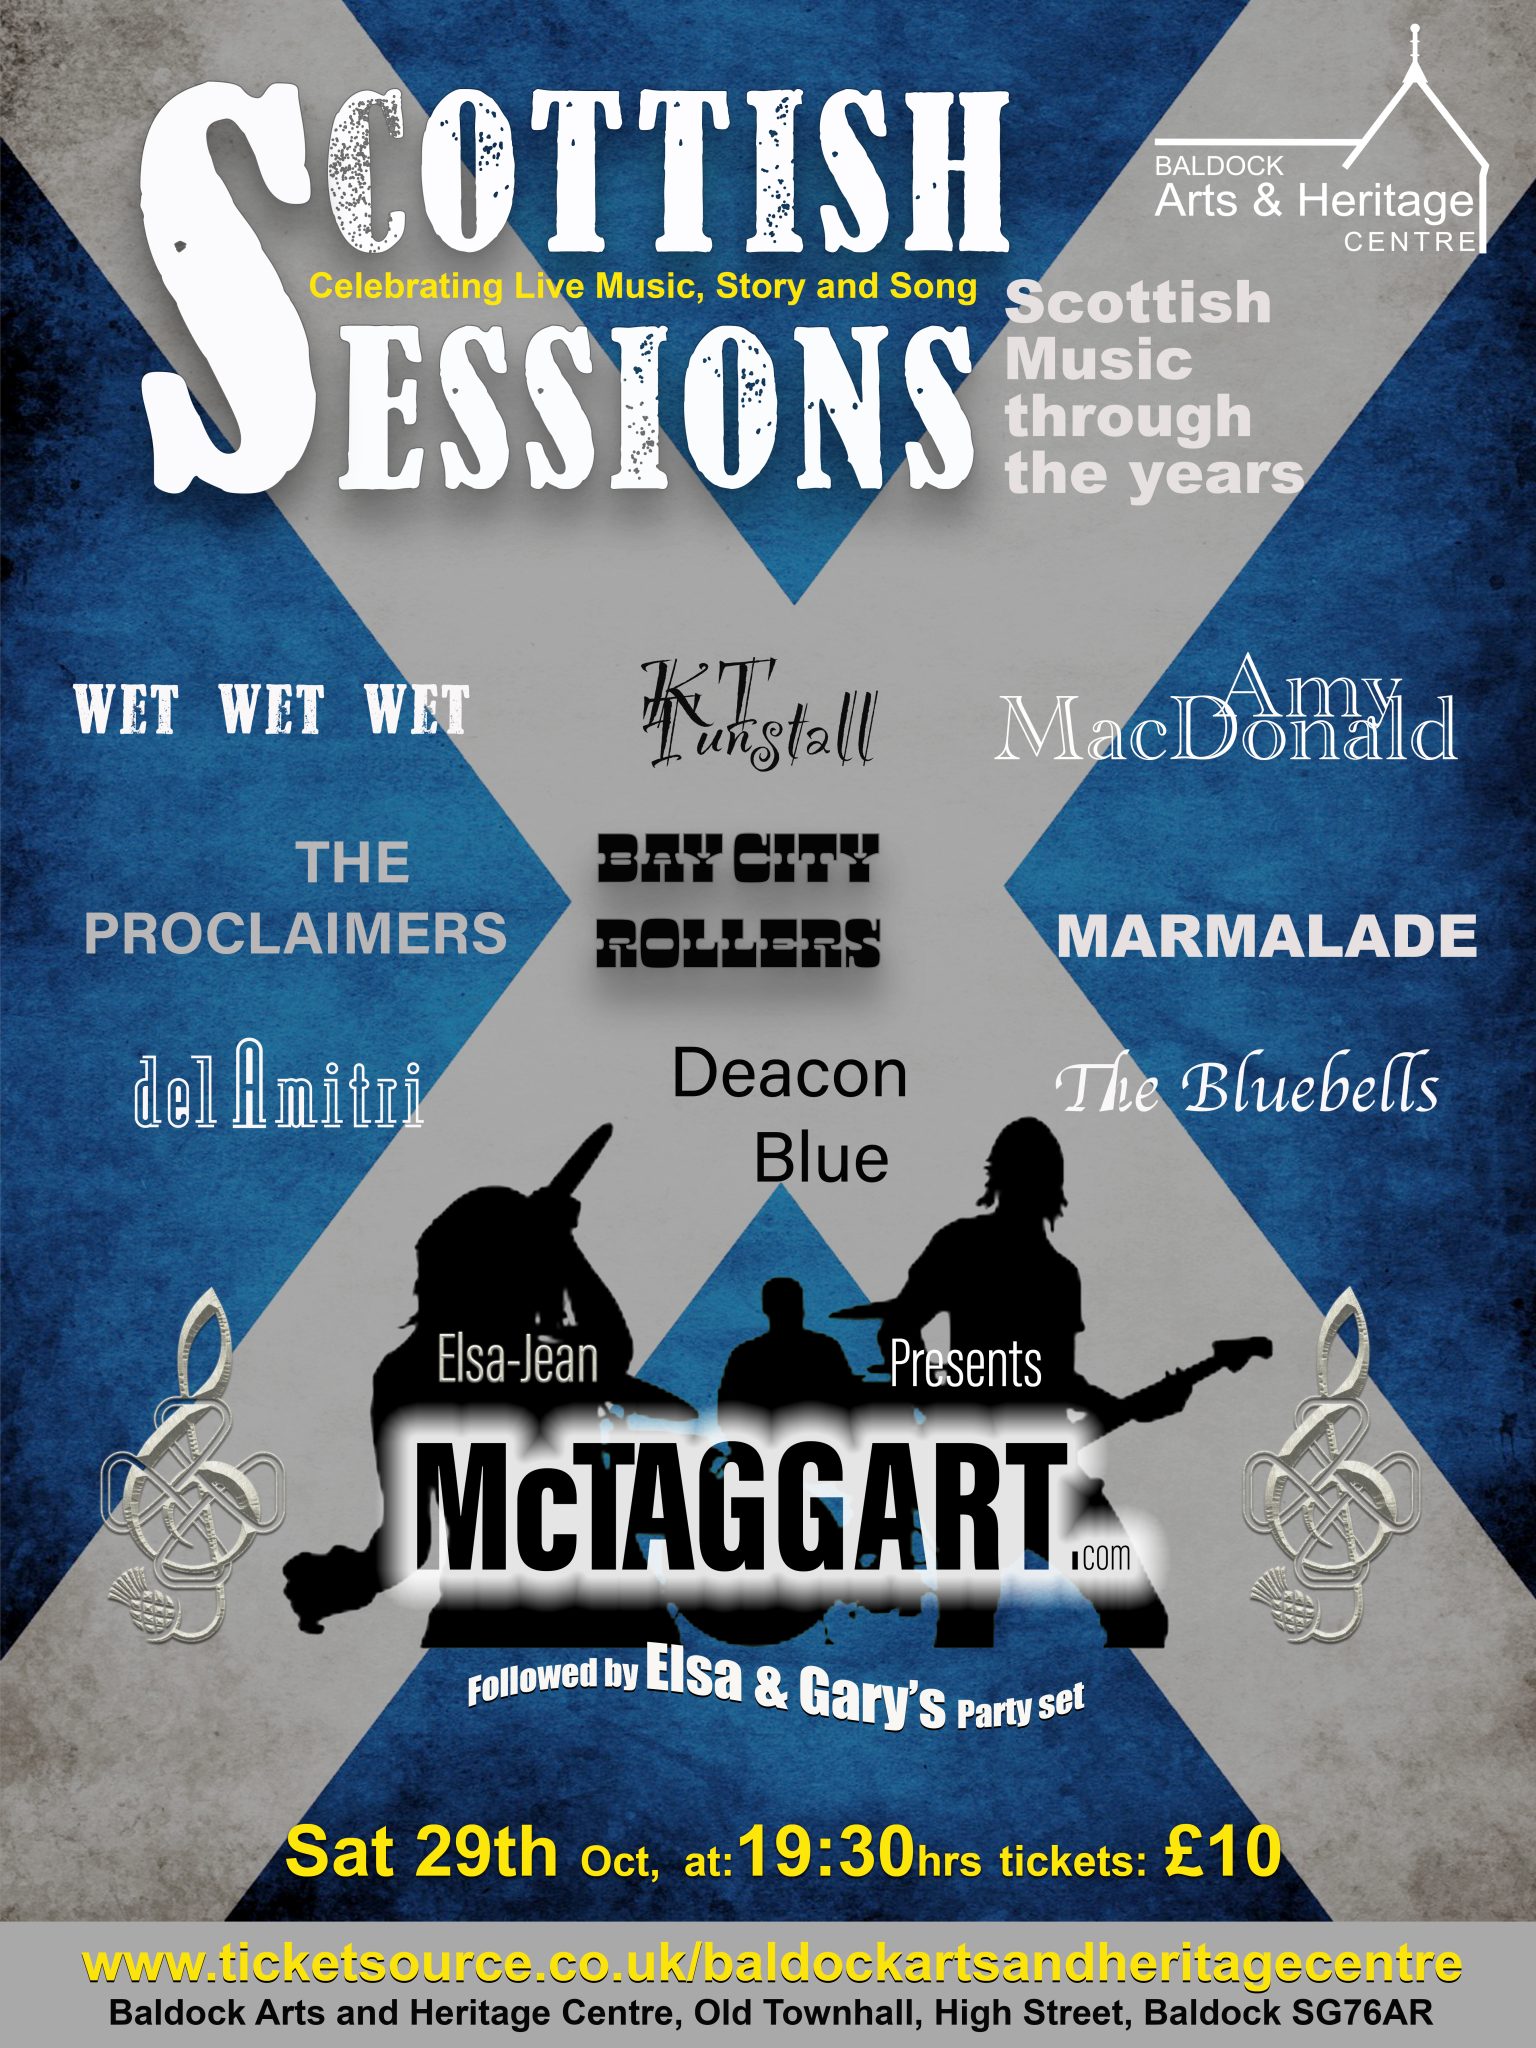 Scottish Sessions the story of popular Scottish music with Elsa Jean McTaggart